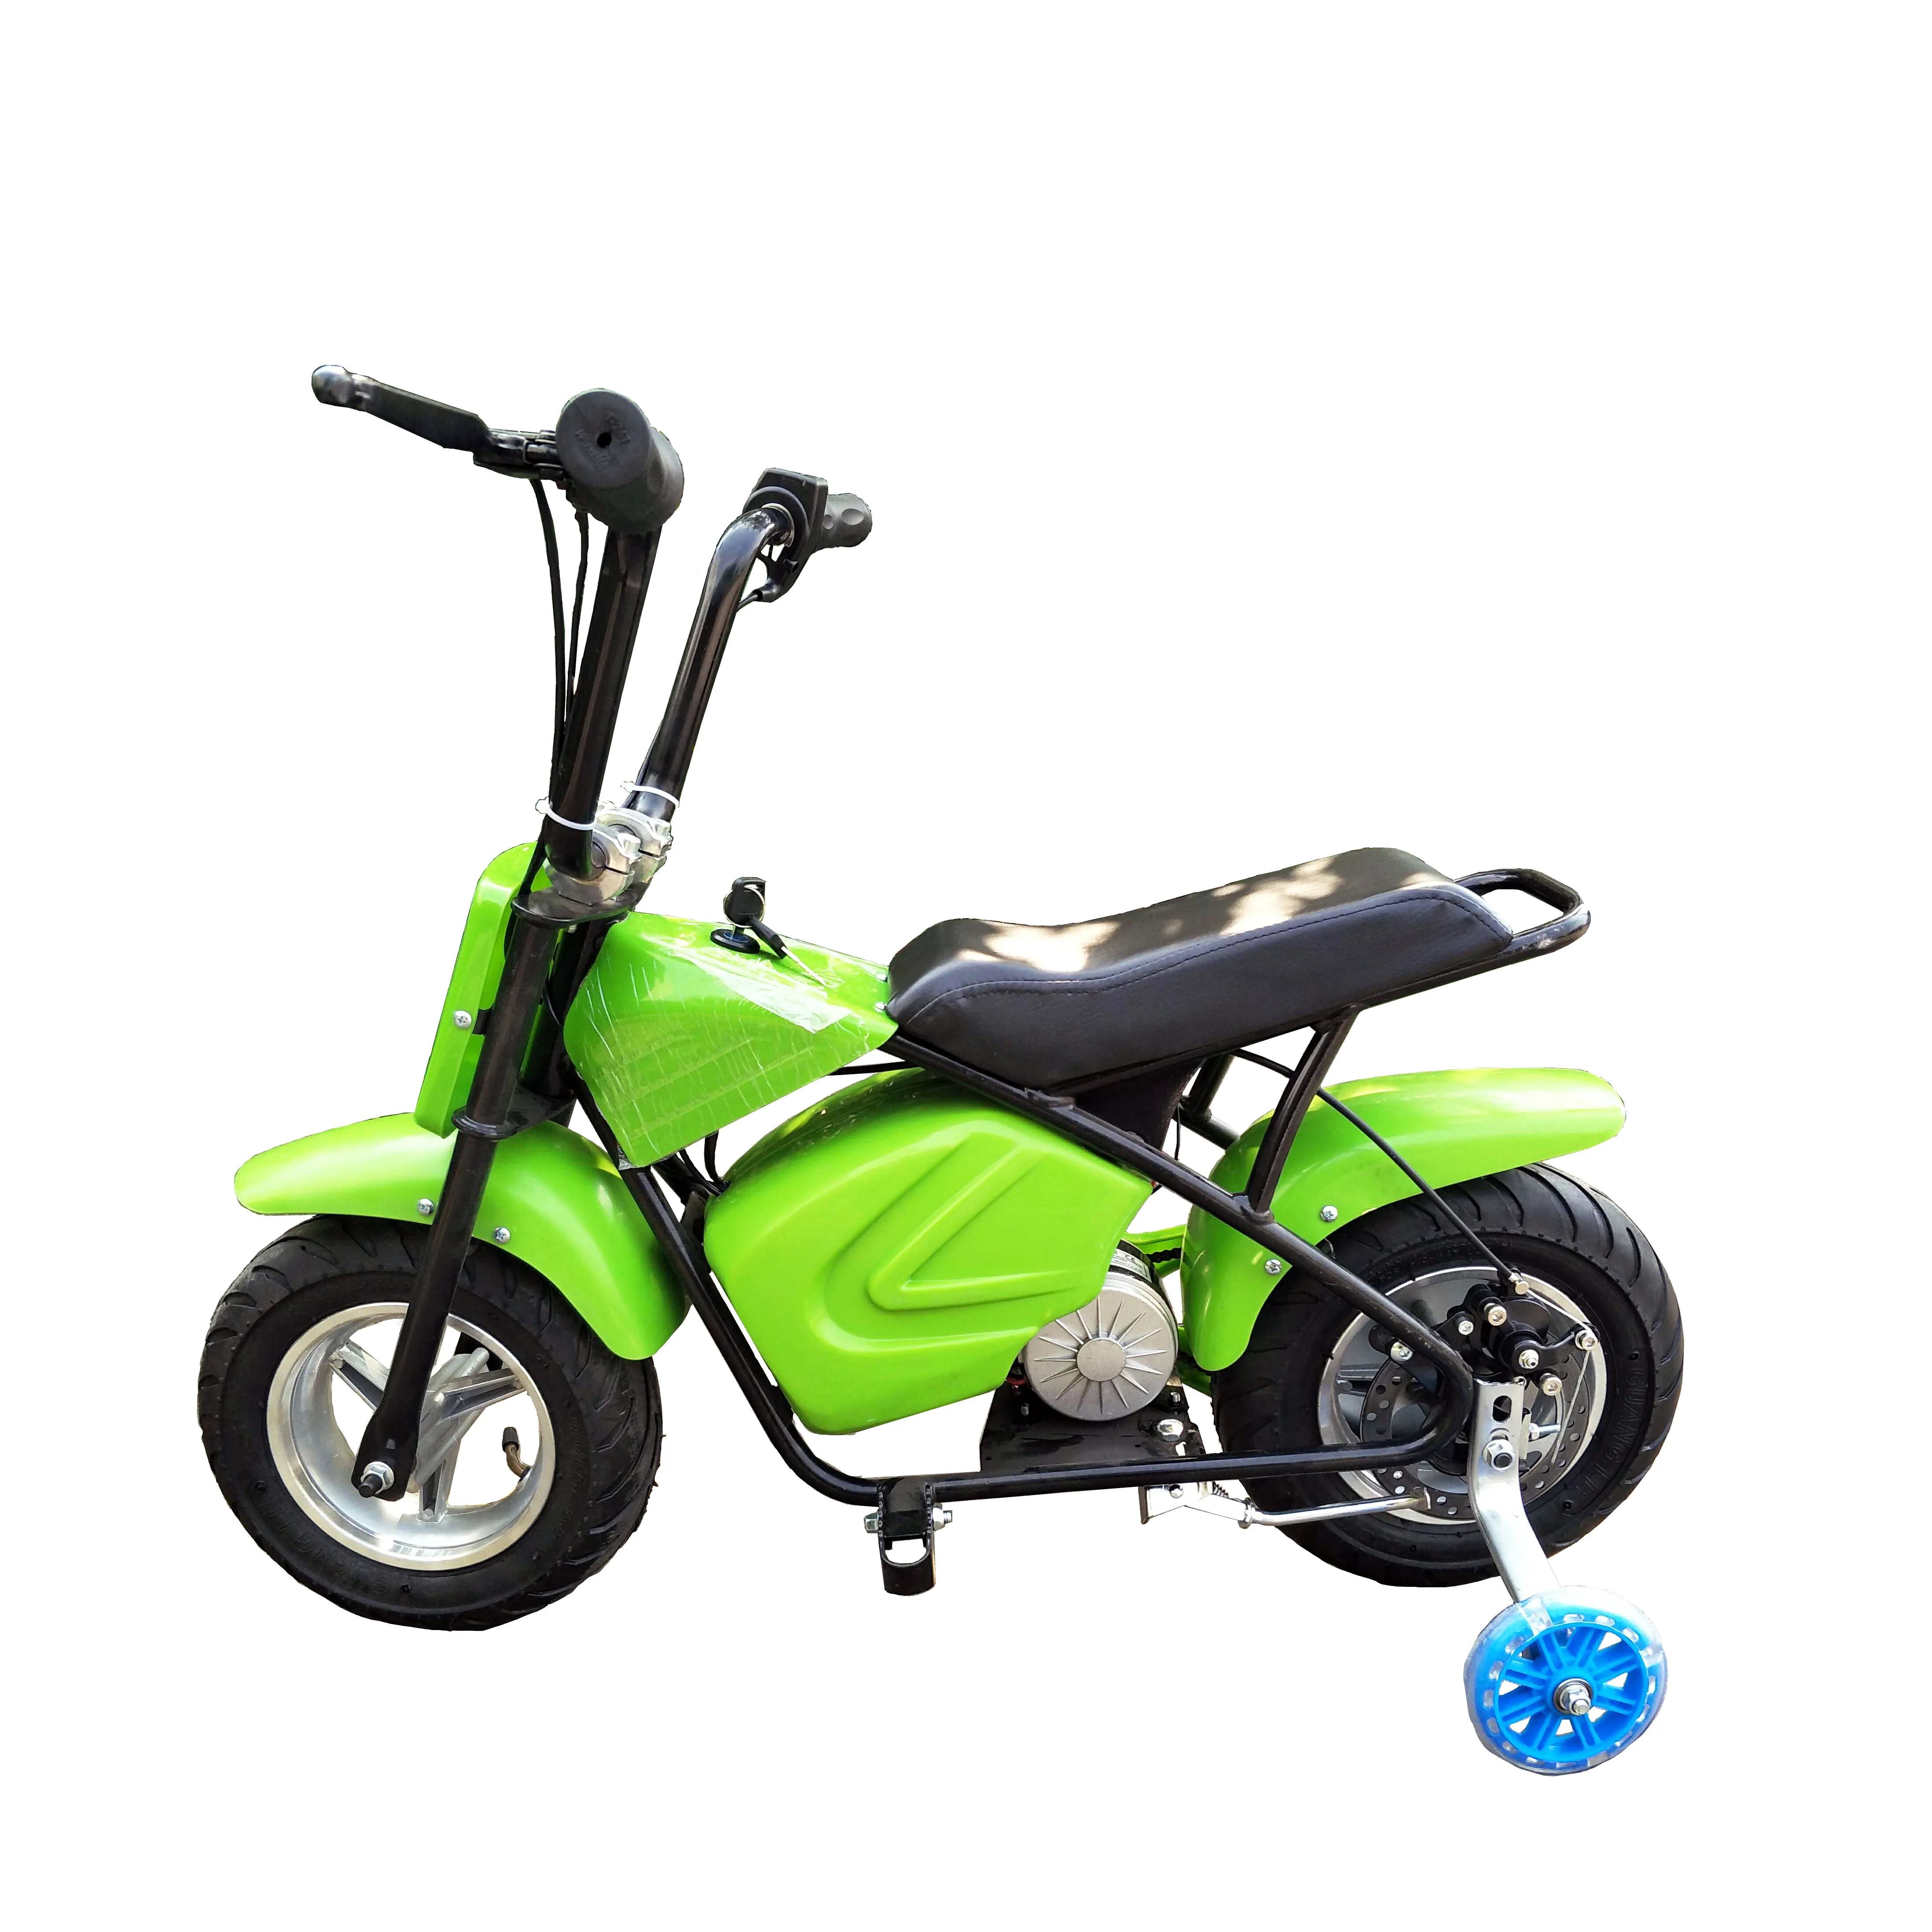 Hot Sale Electric Motorcycle Dirt Bike Mini Scooter 24v 250w